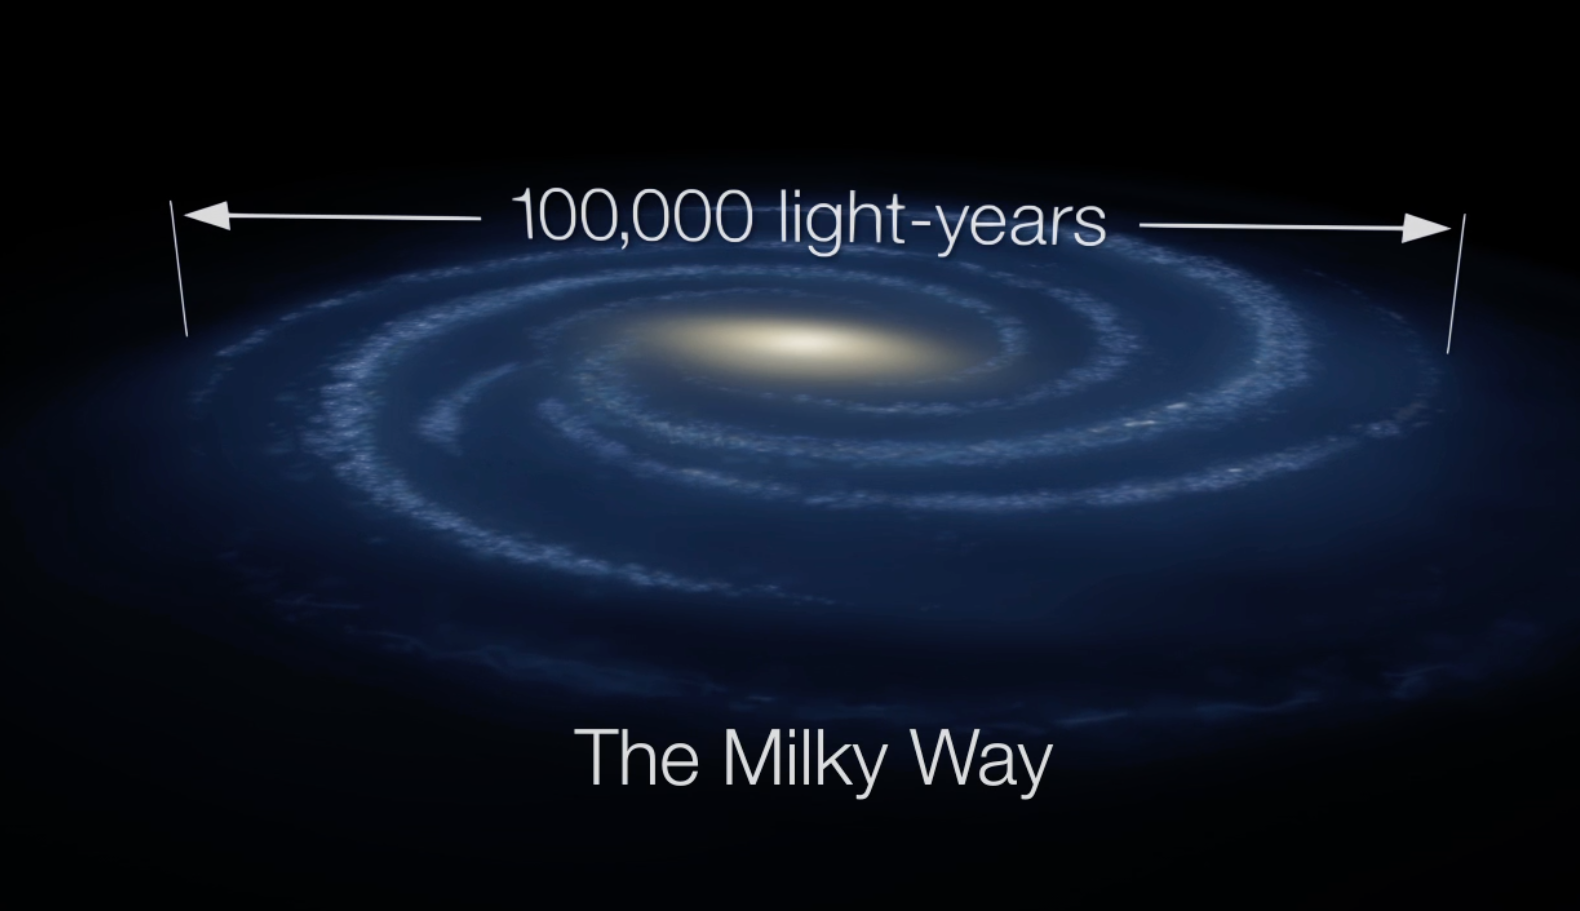 Our Milky Way Galaxy How Big Is Space Exoplanet Exploration Planets Beyond Our Solar System